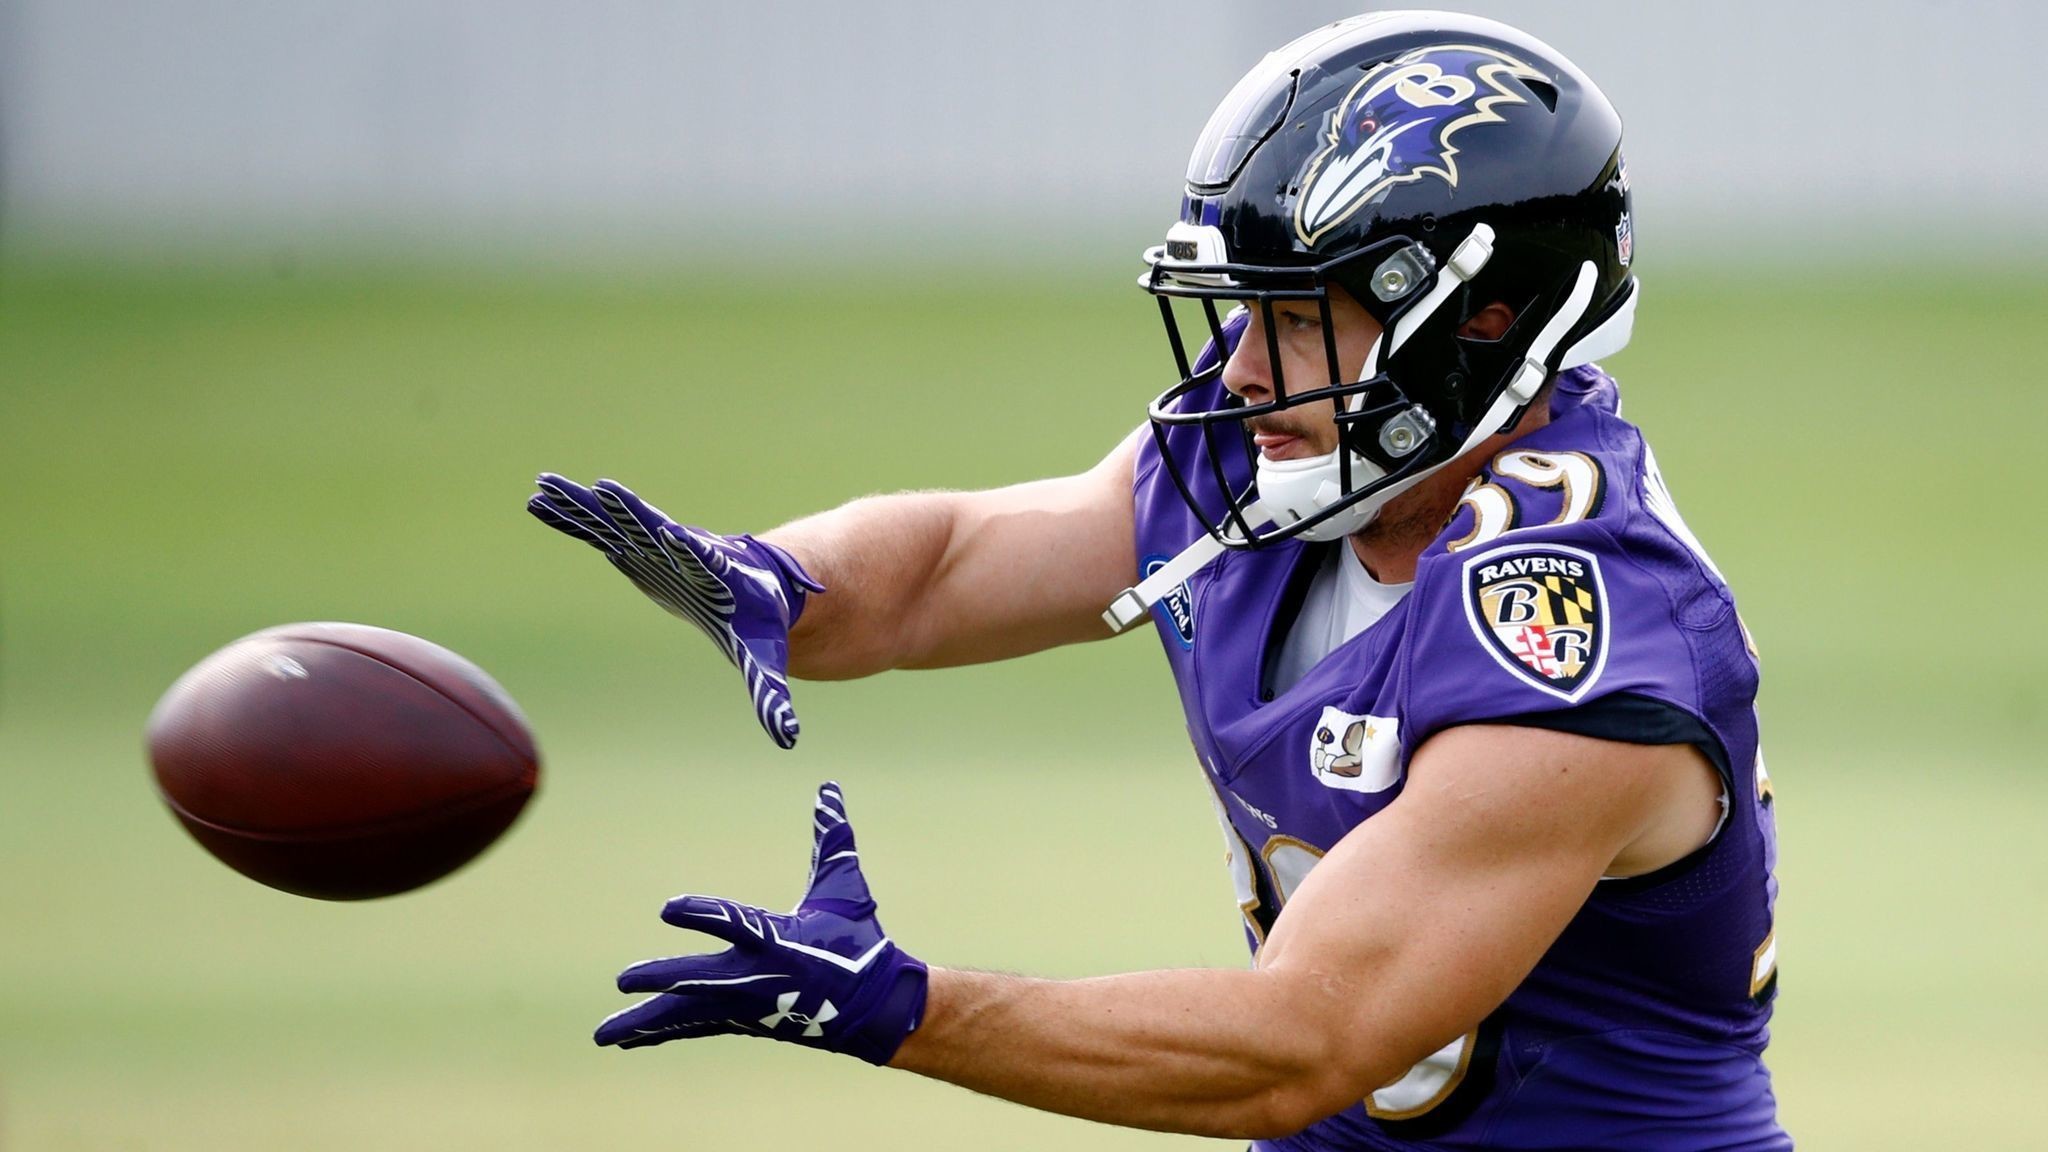 2048x1152 Preston: Injury to Woodhead, inadequate planning leave Ravens searching for  a third-down weapon - Baltimore Sun